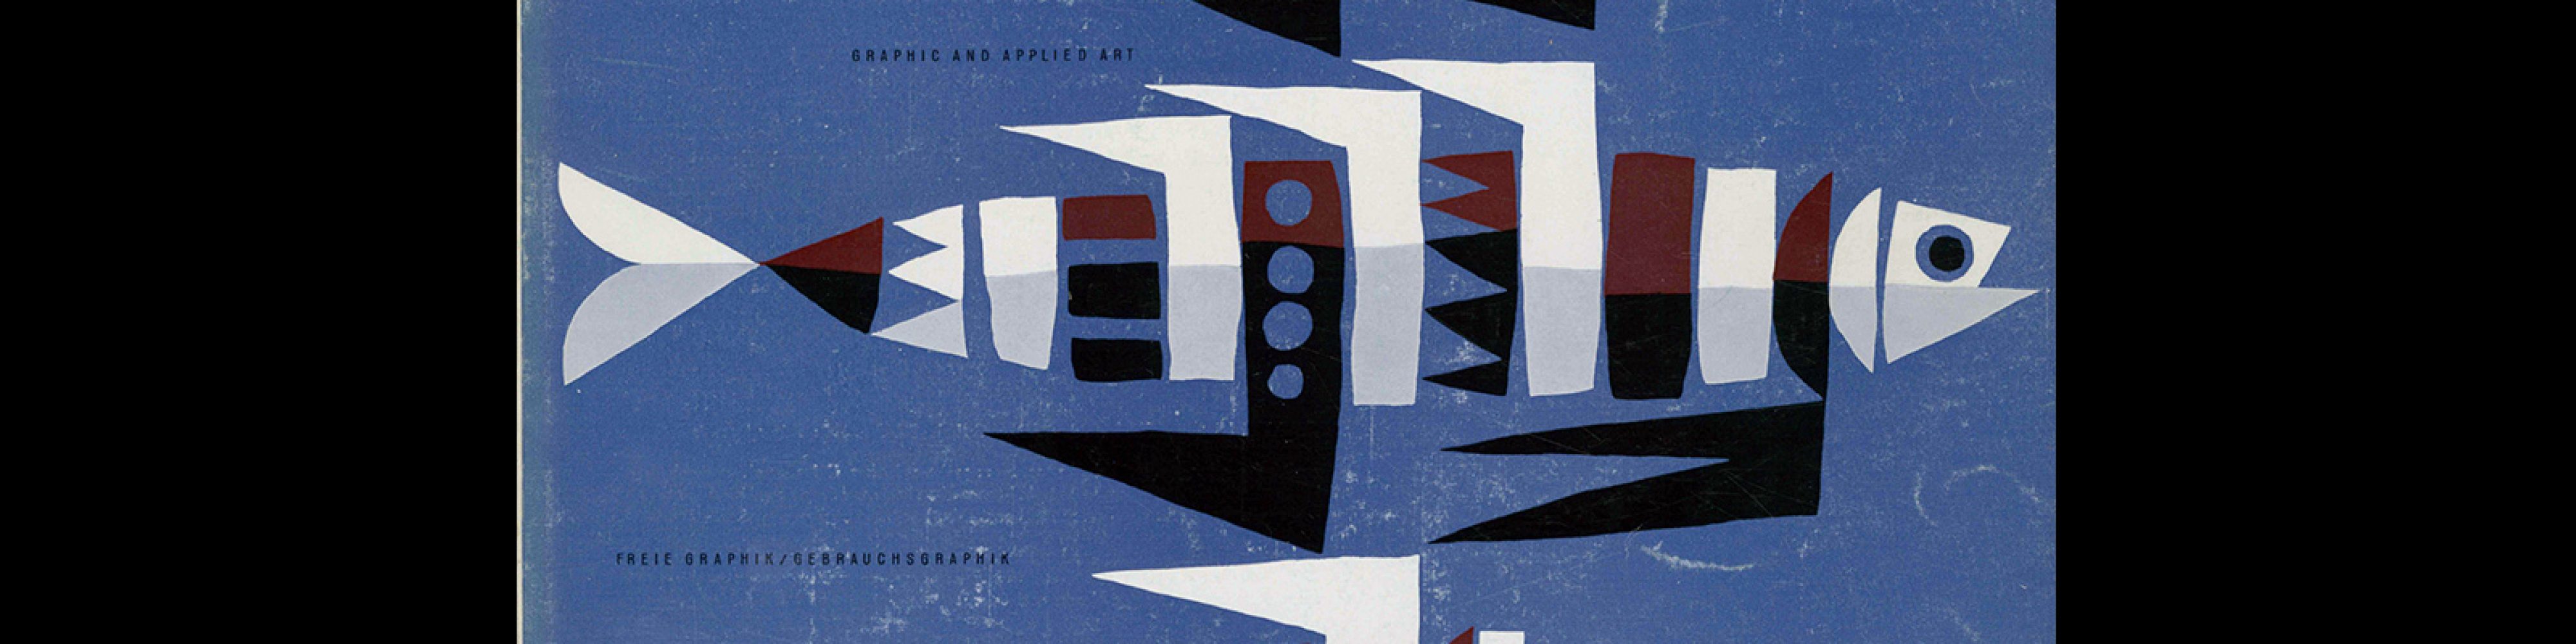 Graphis 49, 1953. Cover design by Hans Hartmann